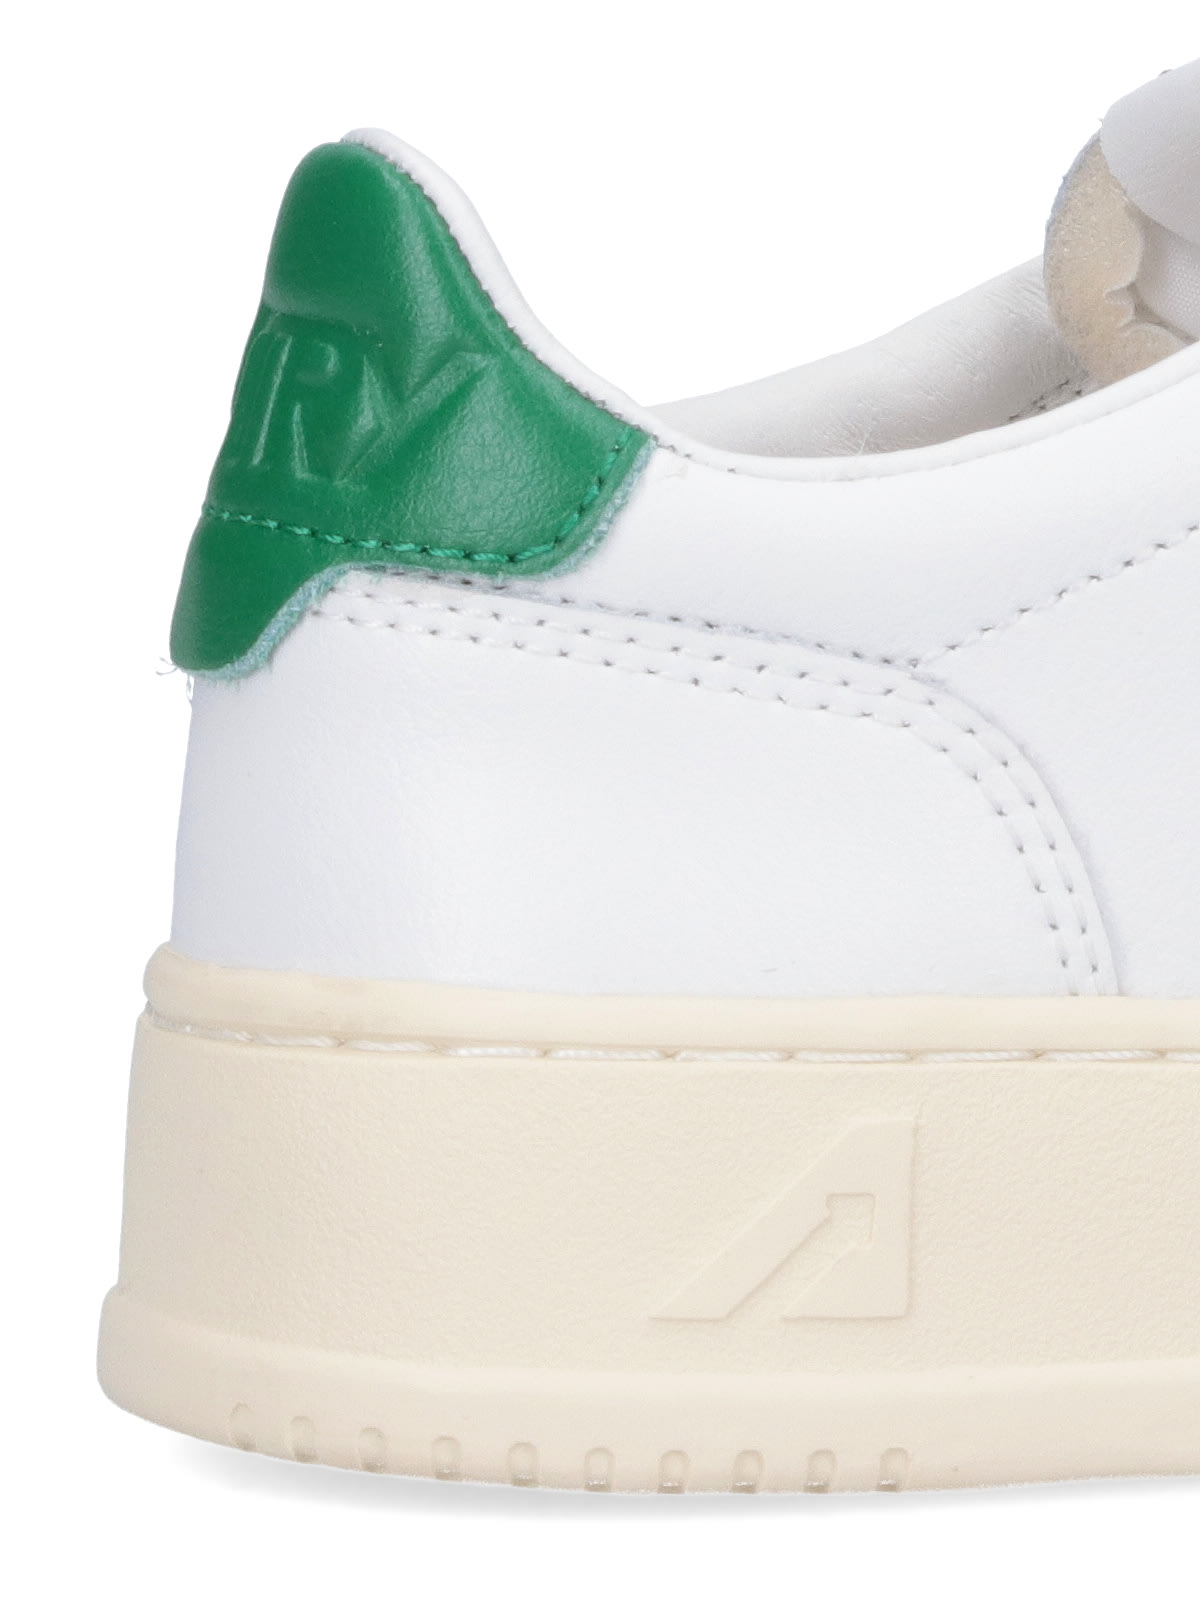 Shop Autry Medalist Low Sneakers In Wht/green